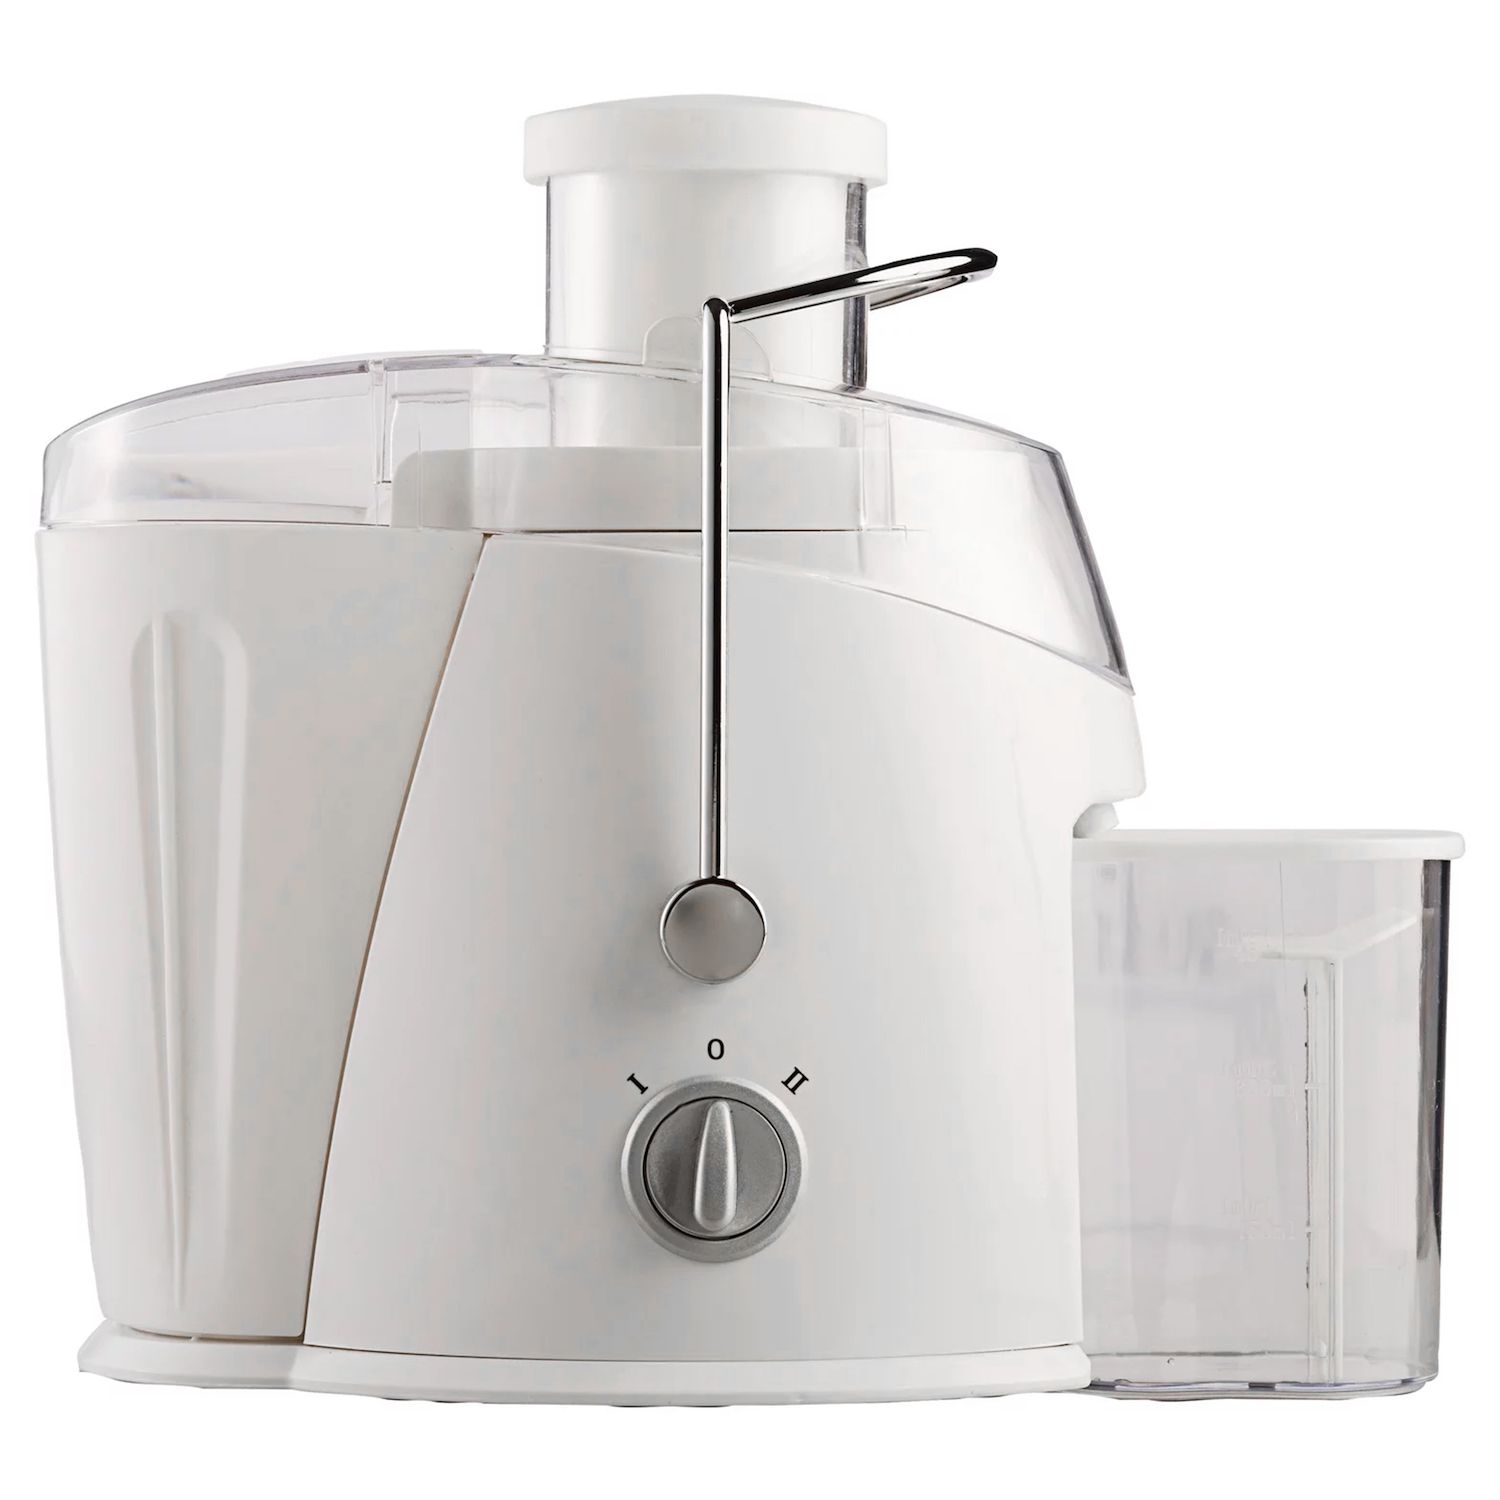 BELLA 700Watts Juice Extractor, White with Stainless Steel (NEW) JG1